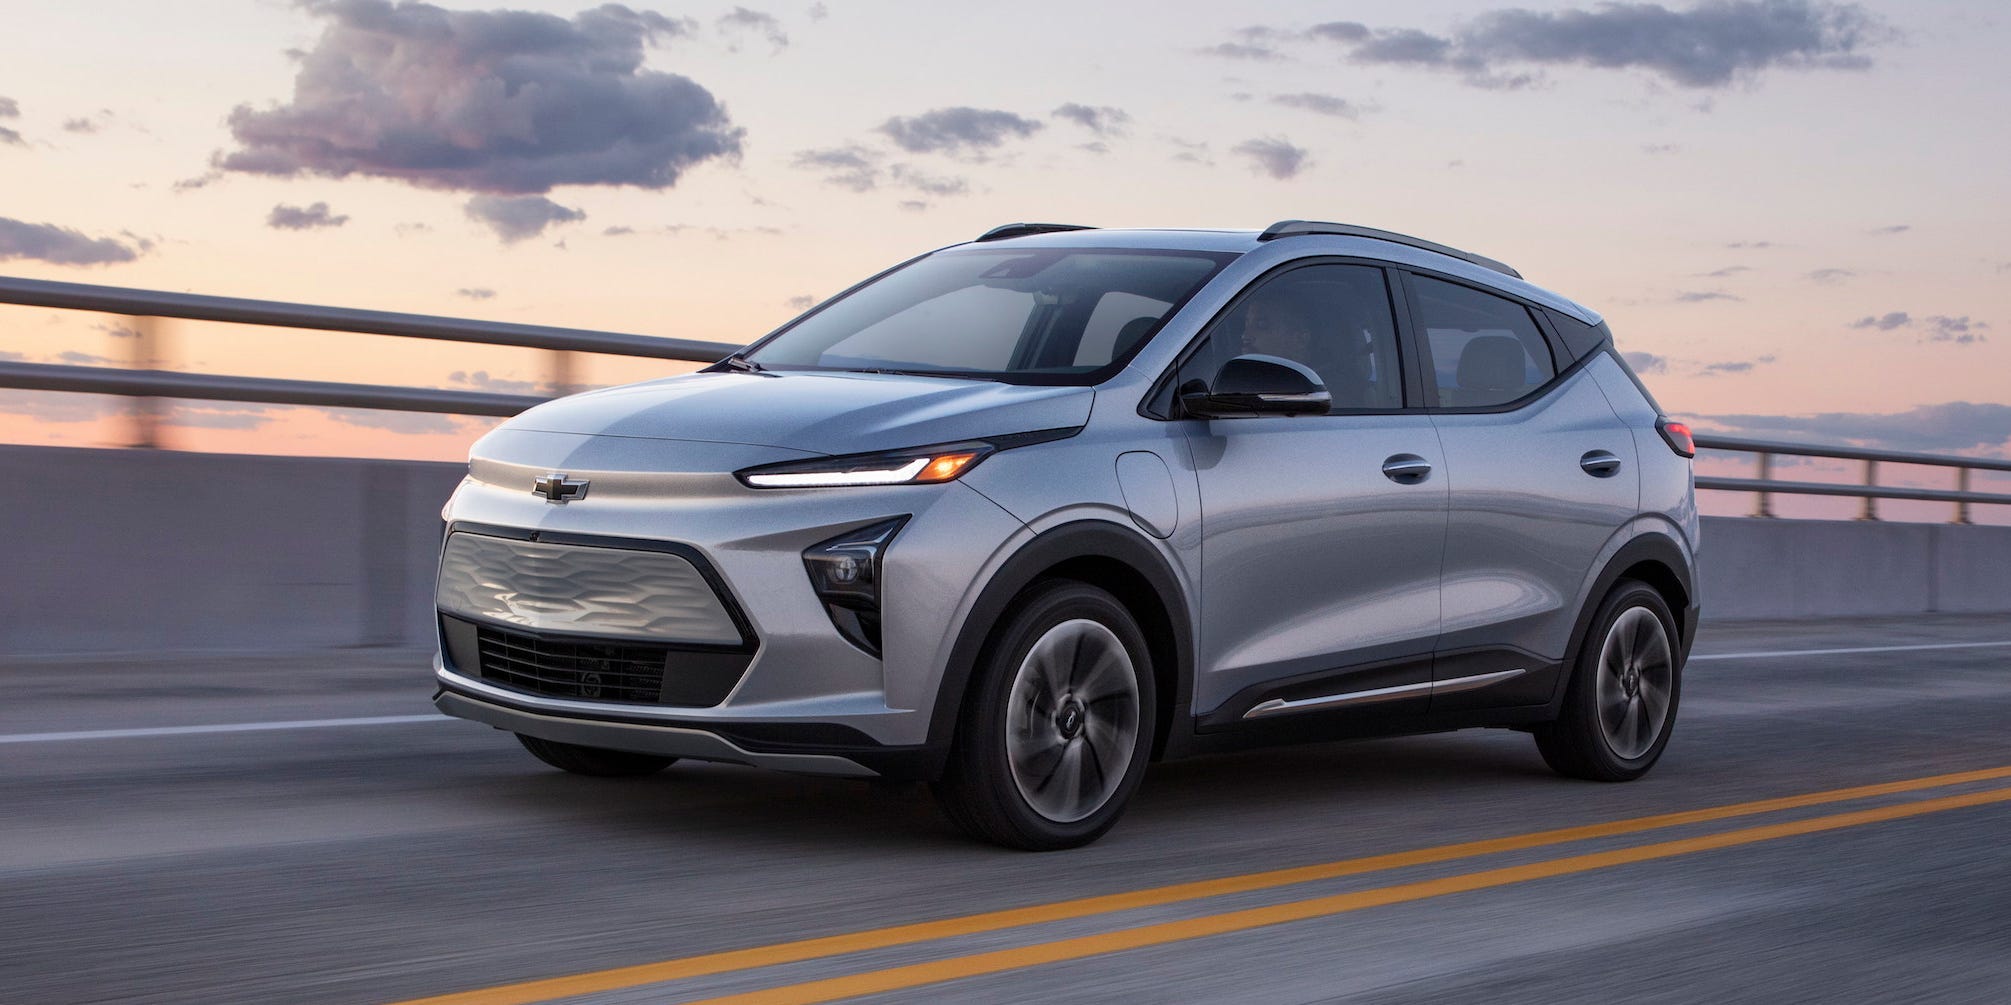 Chevrolet just debuted its cheapest 2 EVs yet as part of its massive electric car push – check out the 2022 Bolt EUV and Bolt EV